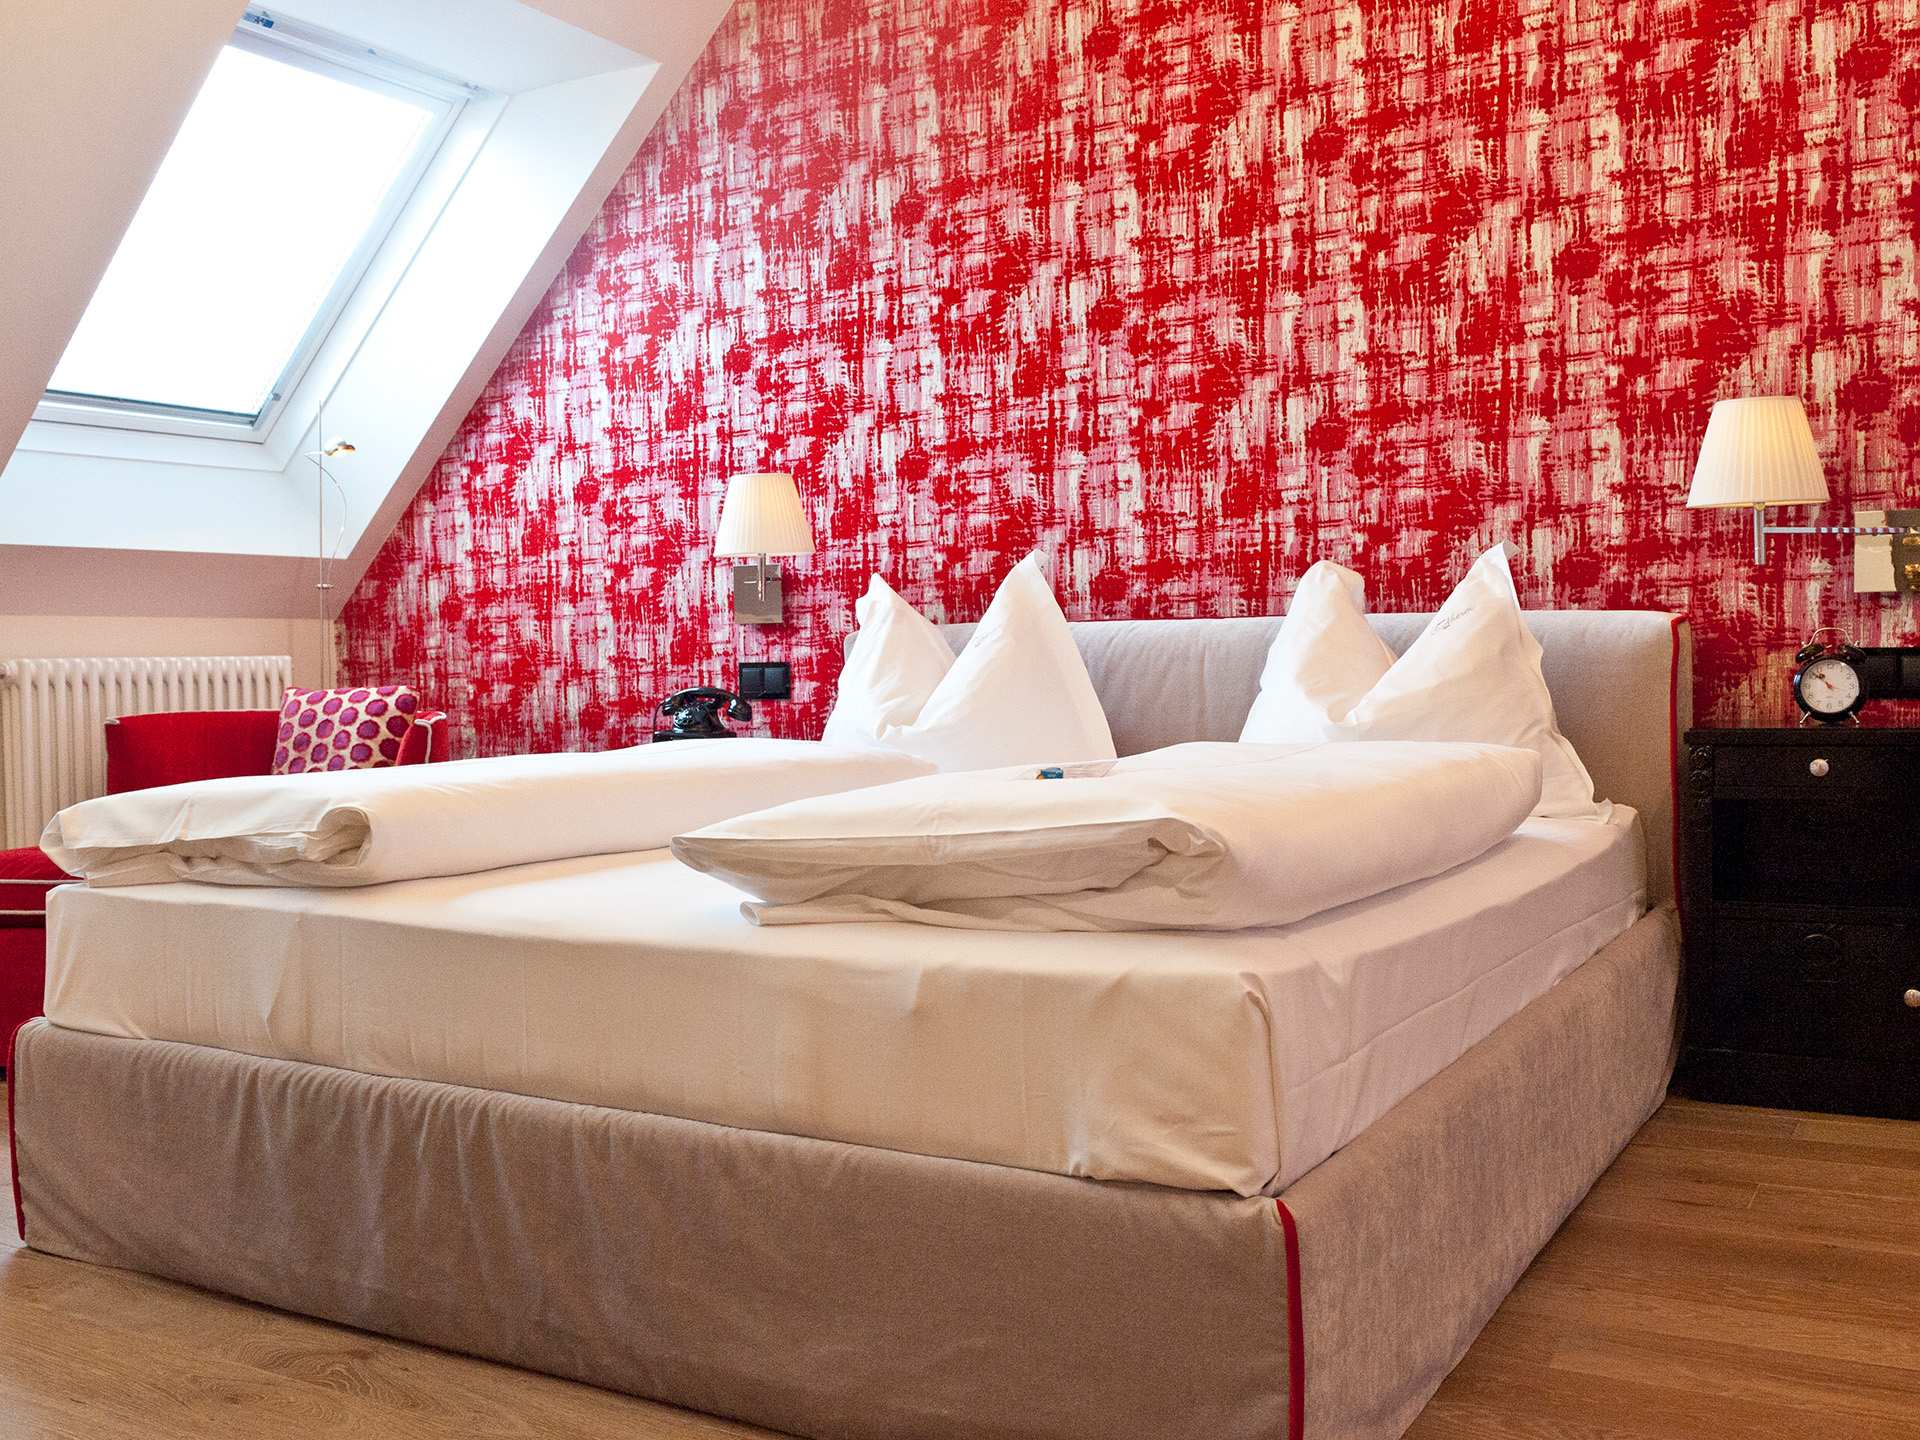 One of the red hotel rooms at Hotel Beethoven